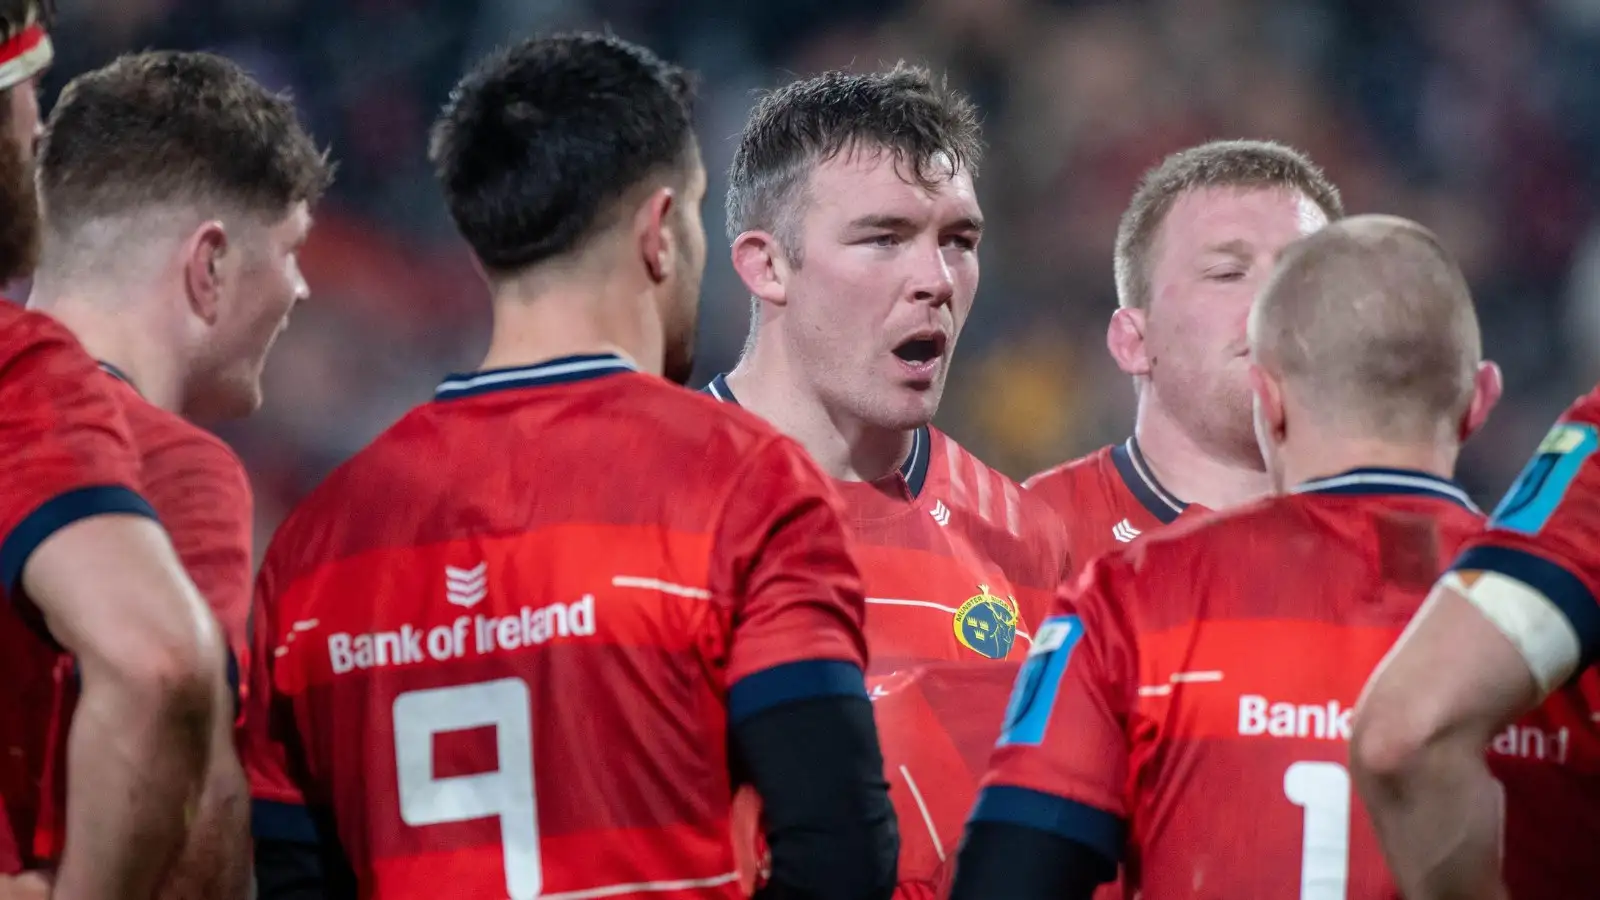 United Rugby Championship: Key international players to miss Munster’s Interpro clash with Ulster